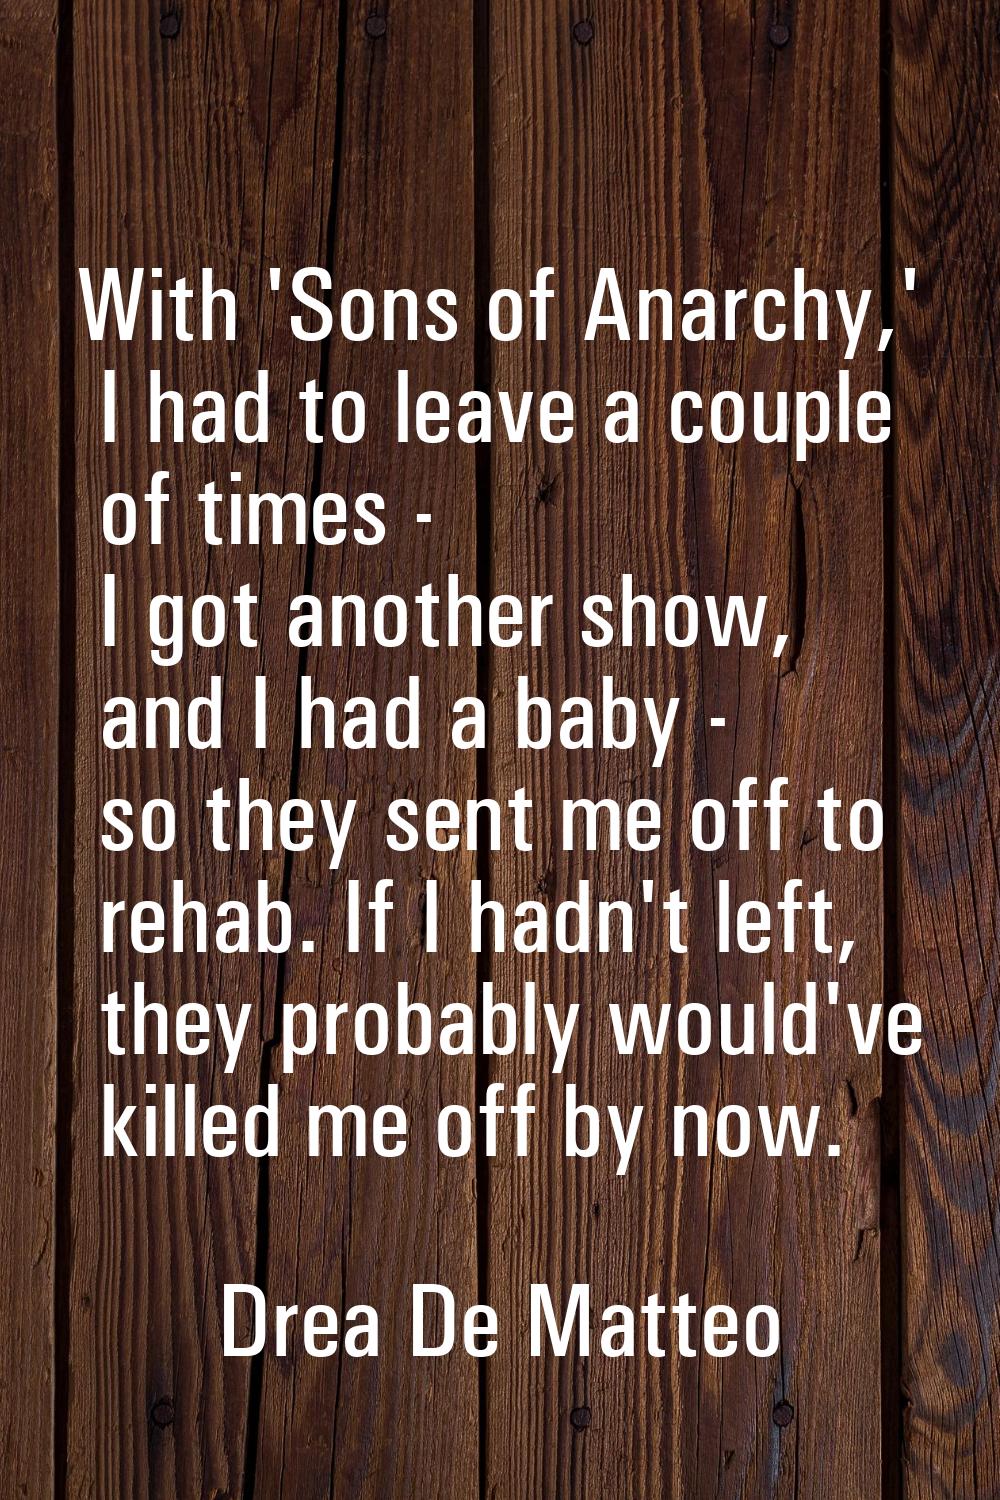 With 'Sons of Anarchy,' I had to leave a couple of times - I got another show, and I had a baby - s